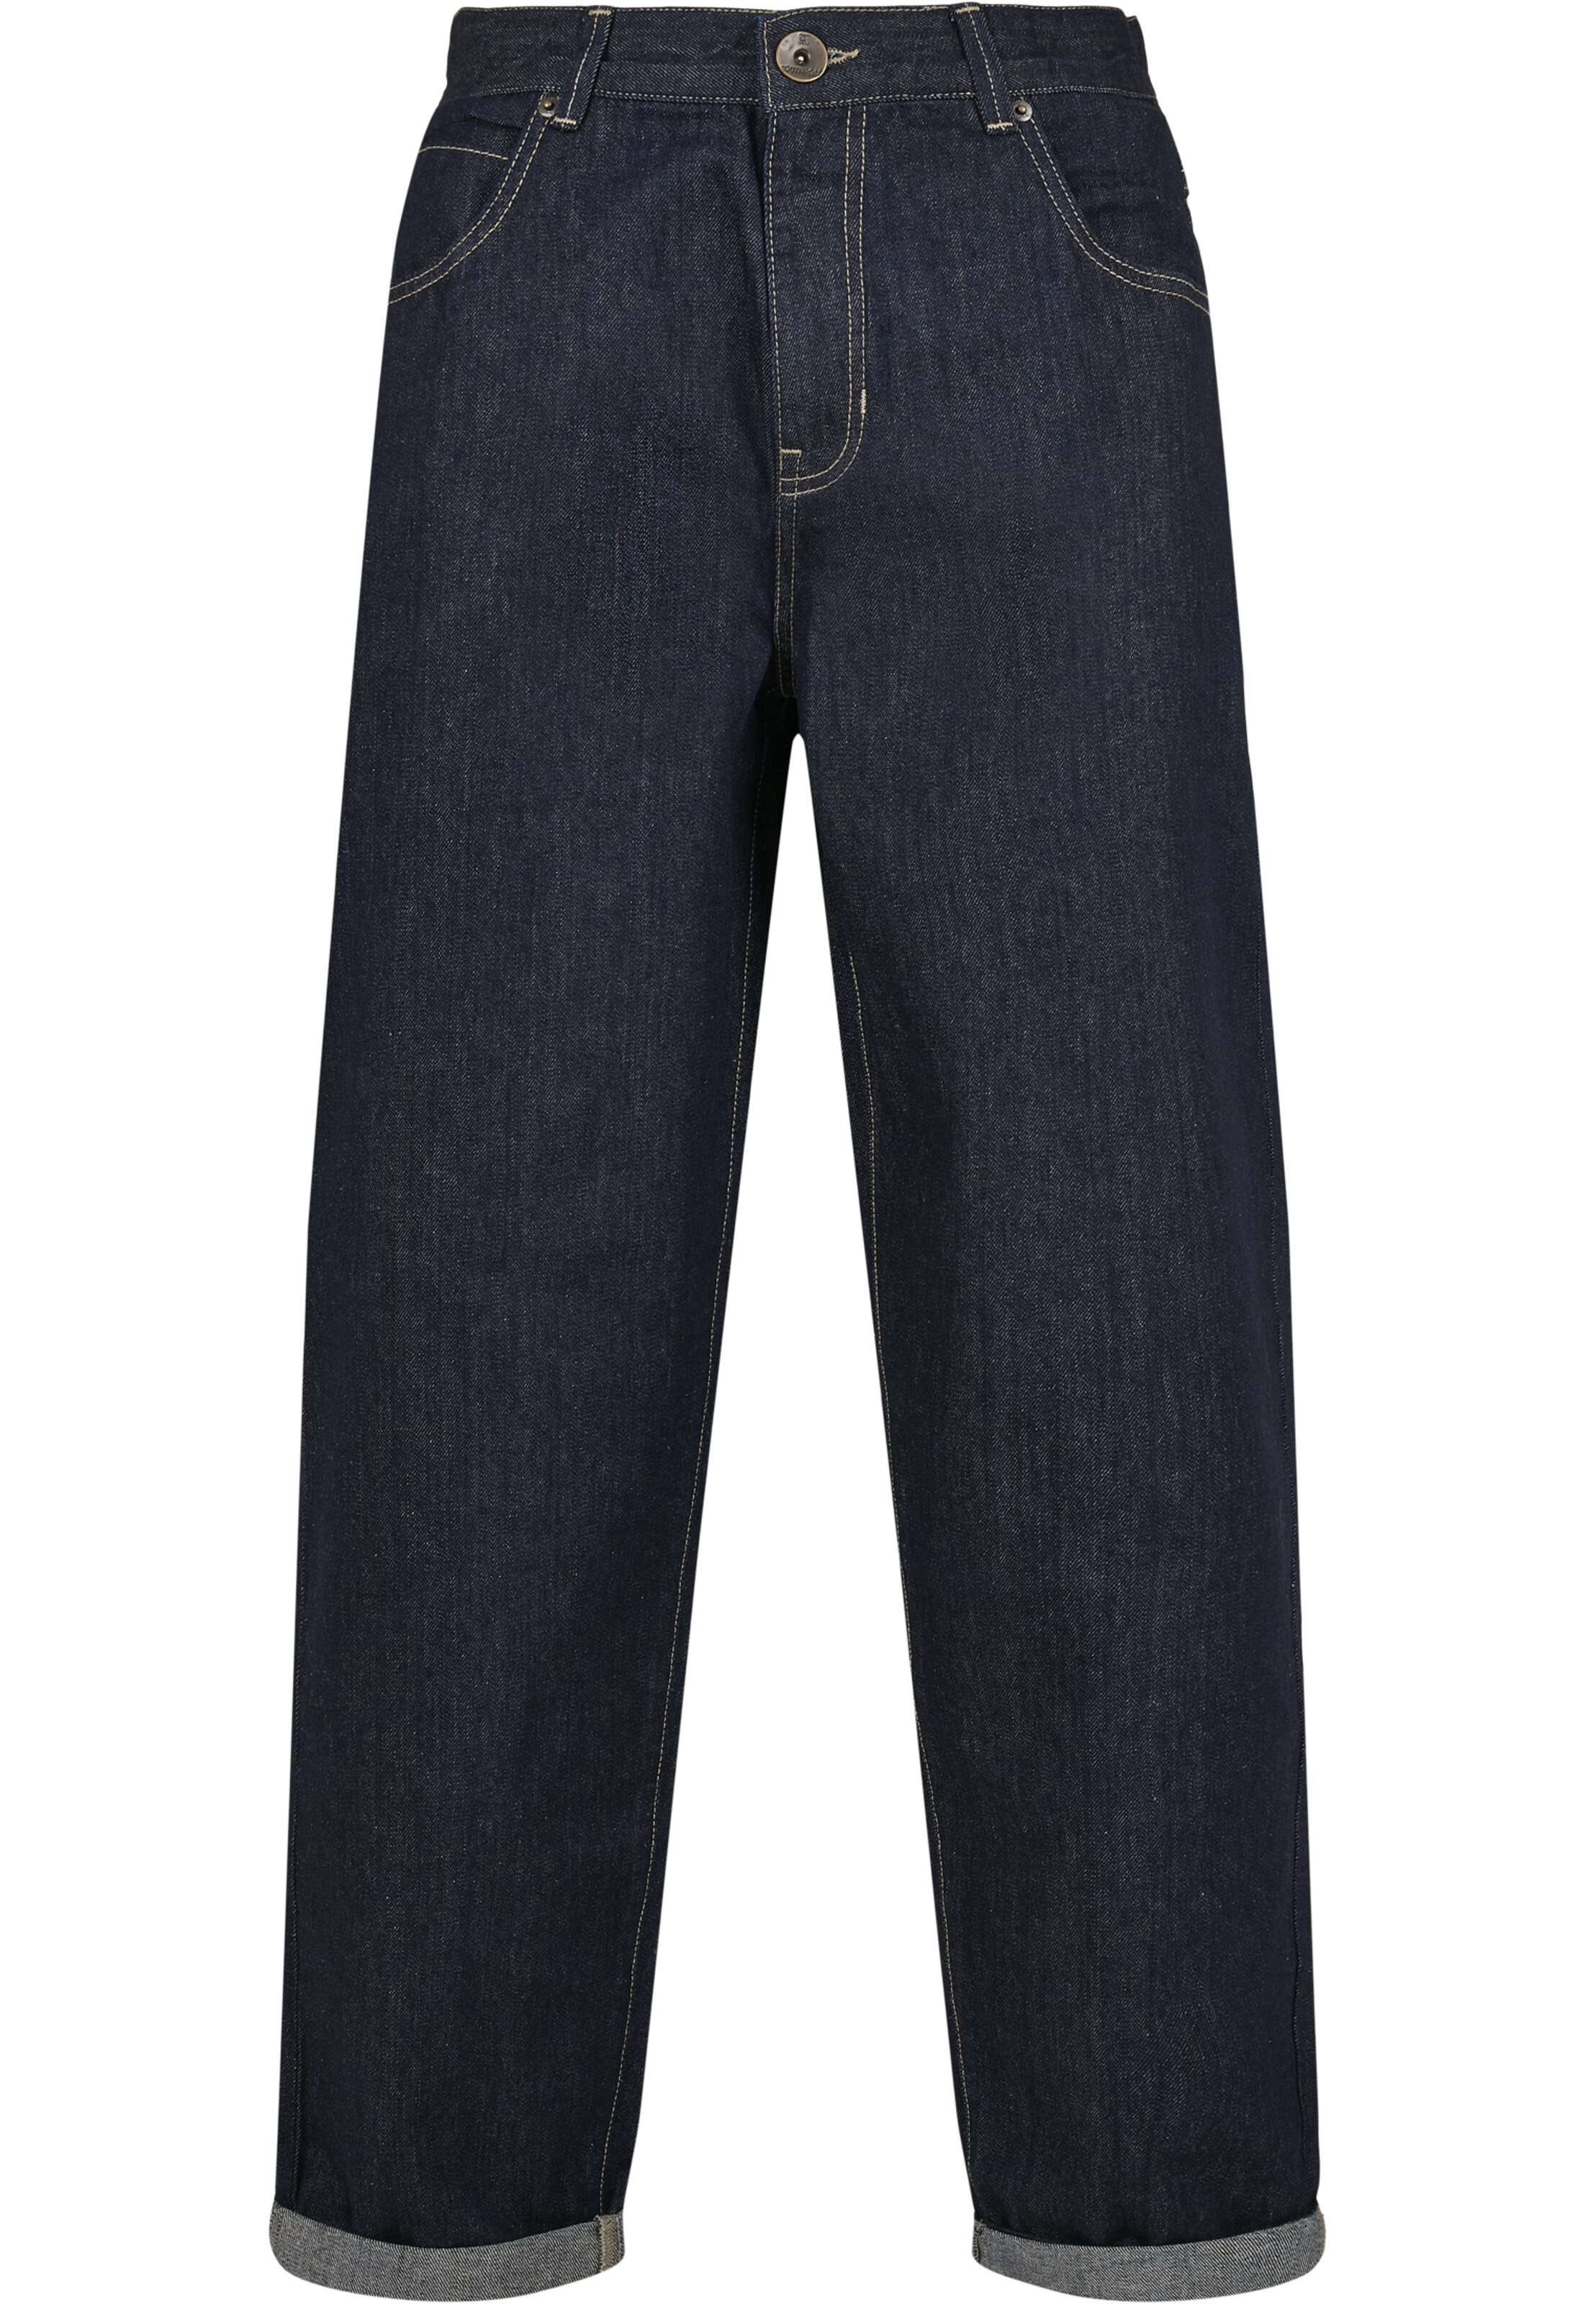 Männer Jeans SOUTHPOLE Jeans in Indigo - FO13926